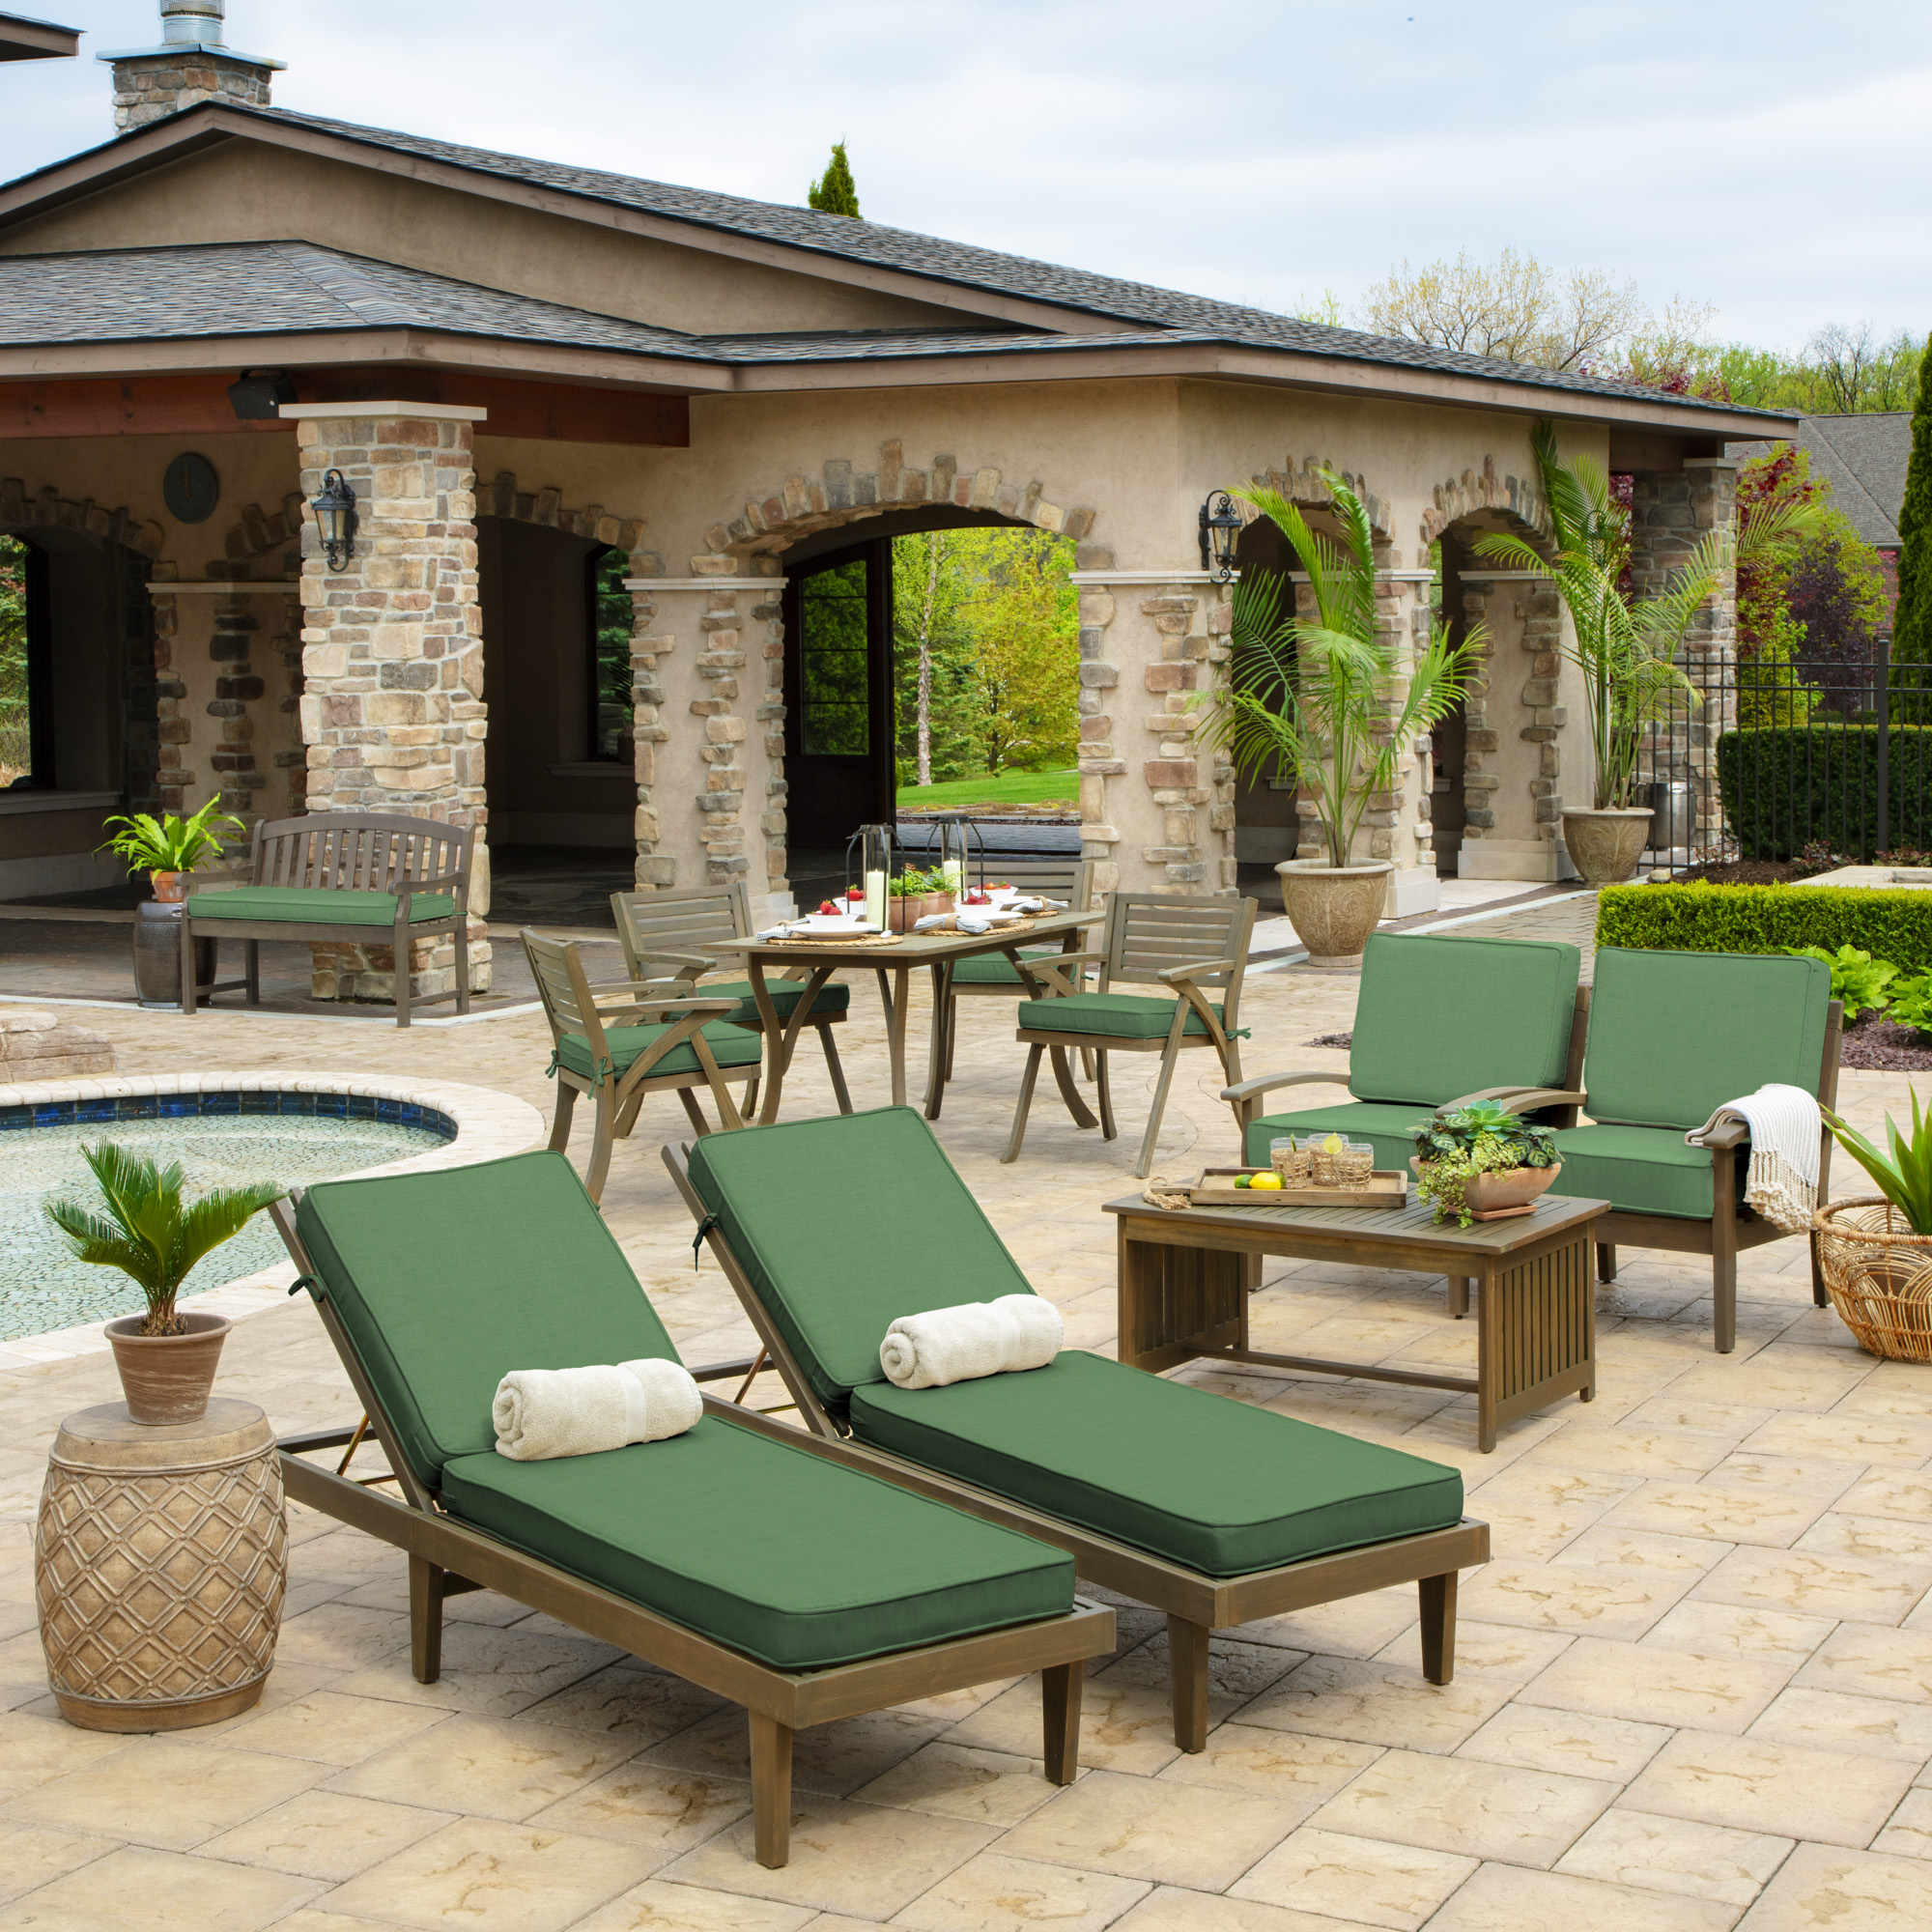 green outdoor cushions on patio